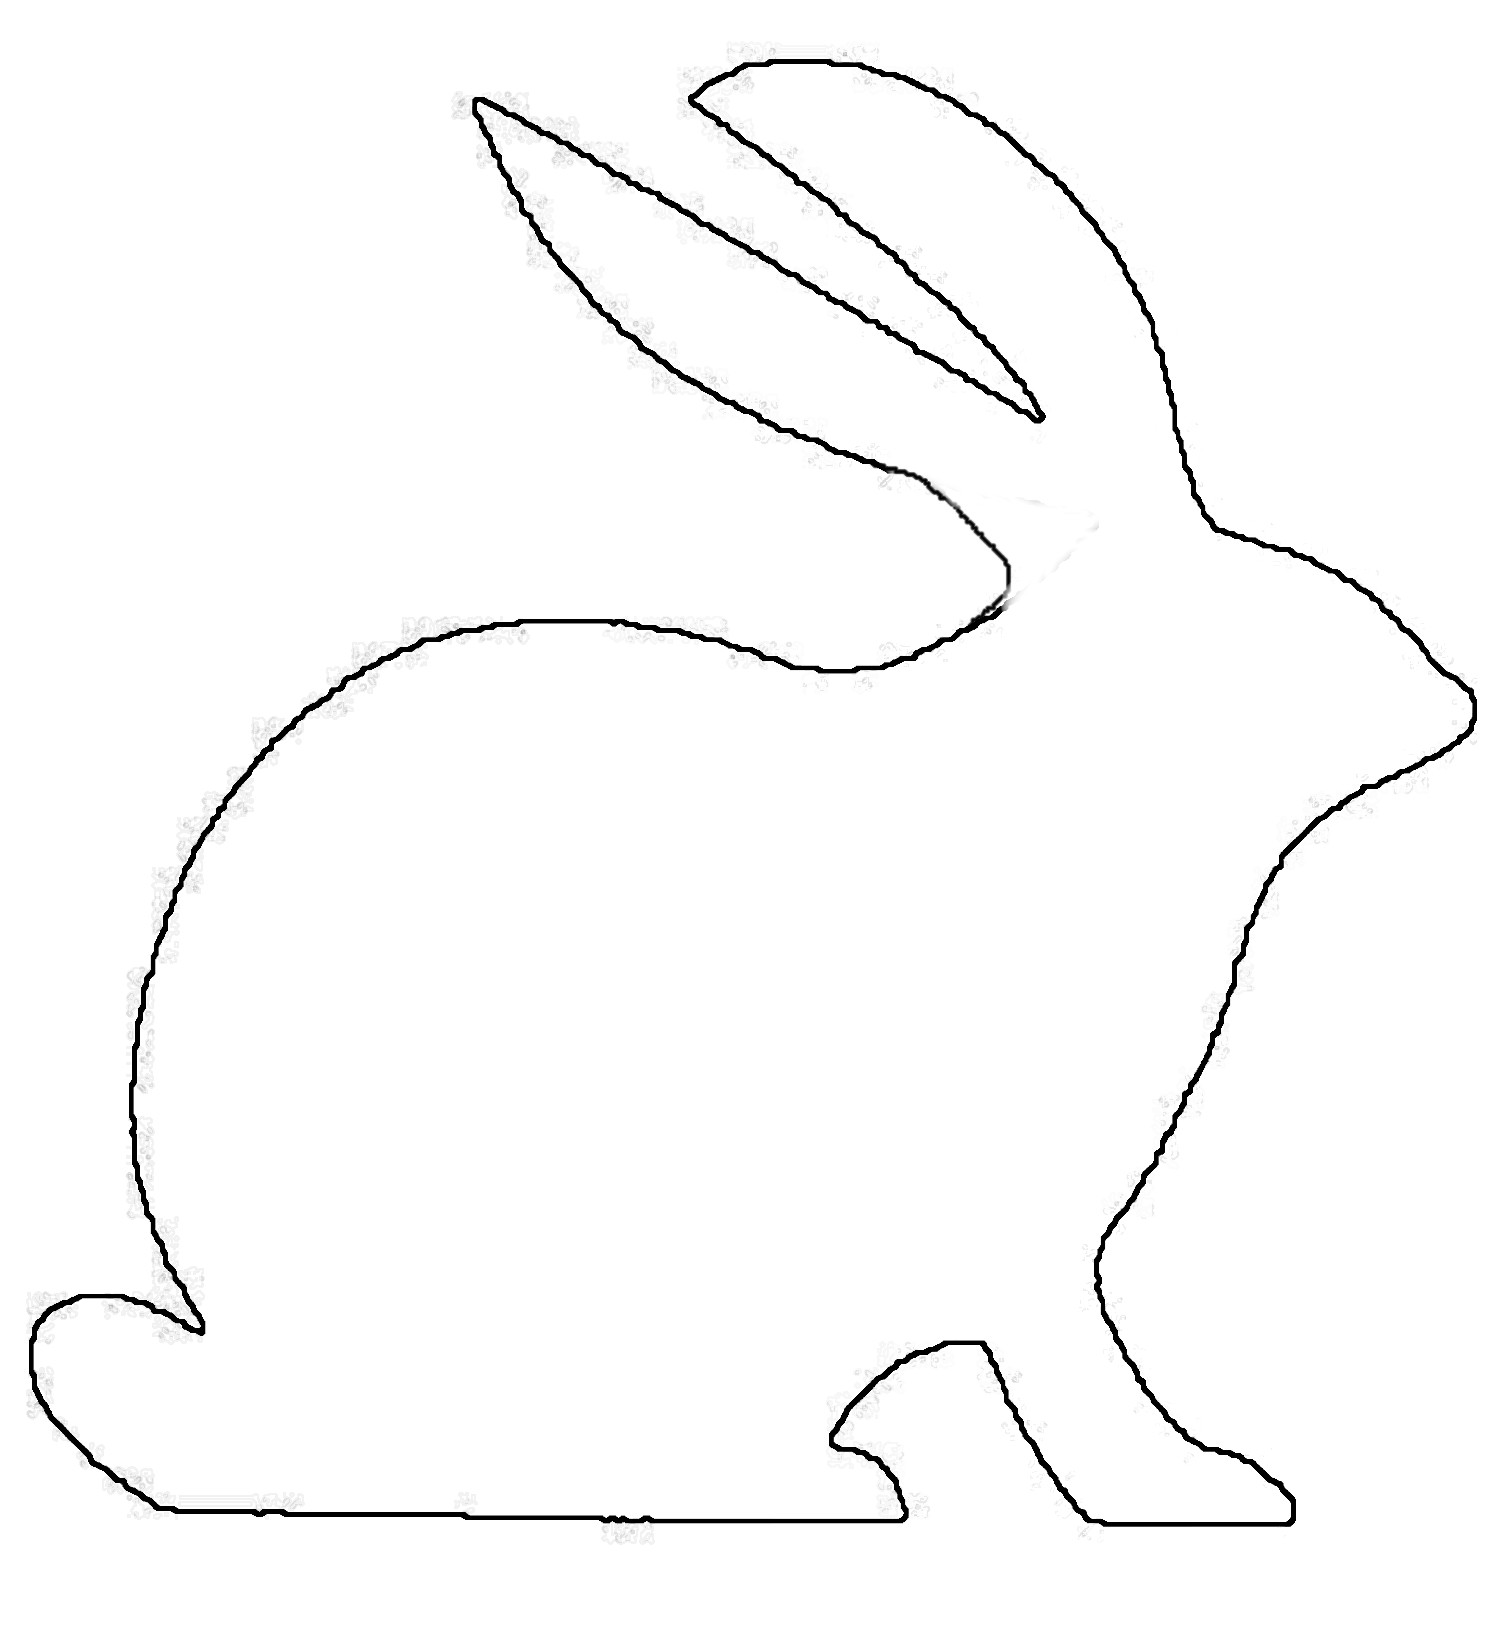 Outline Drawing Of Rabbits - ClipArt Best